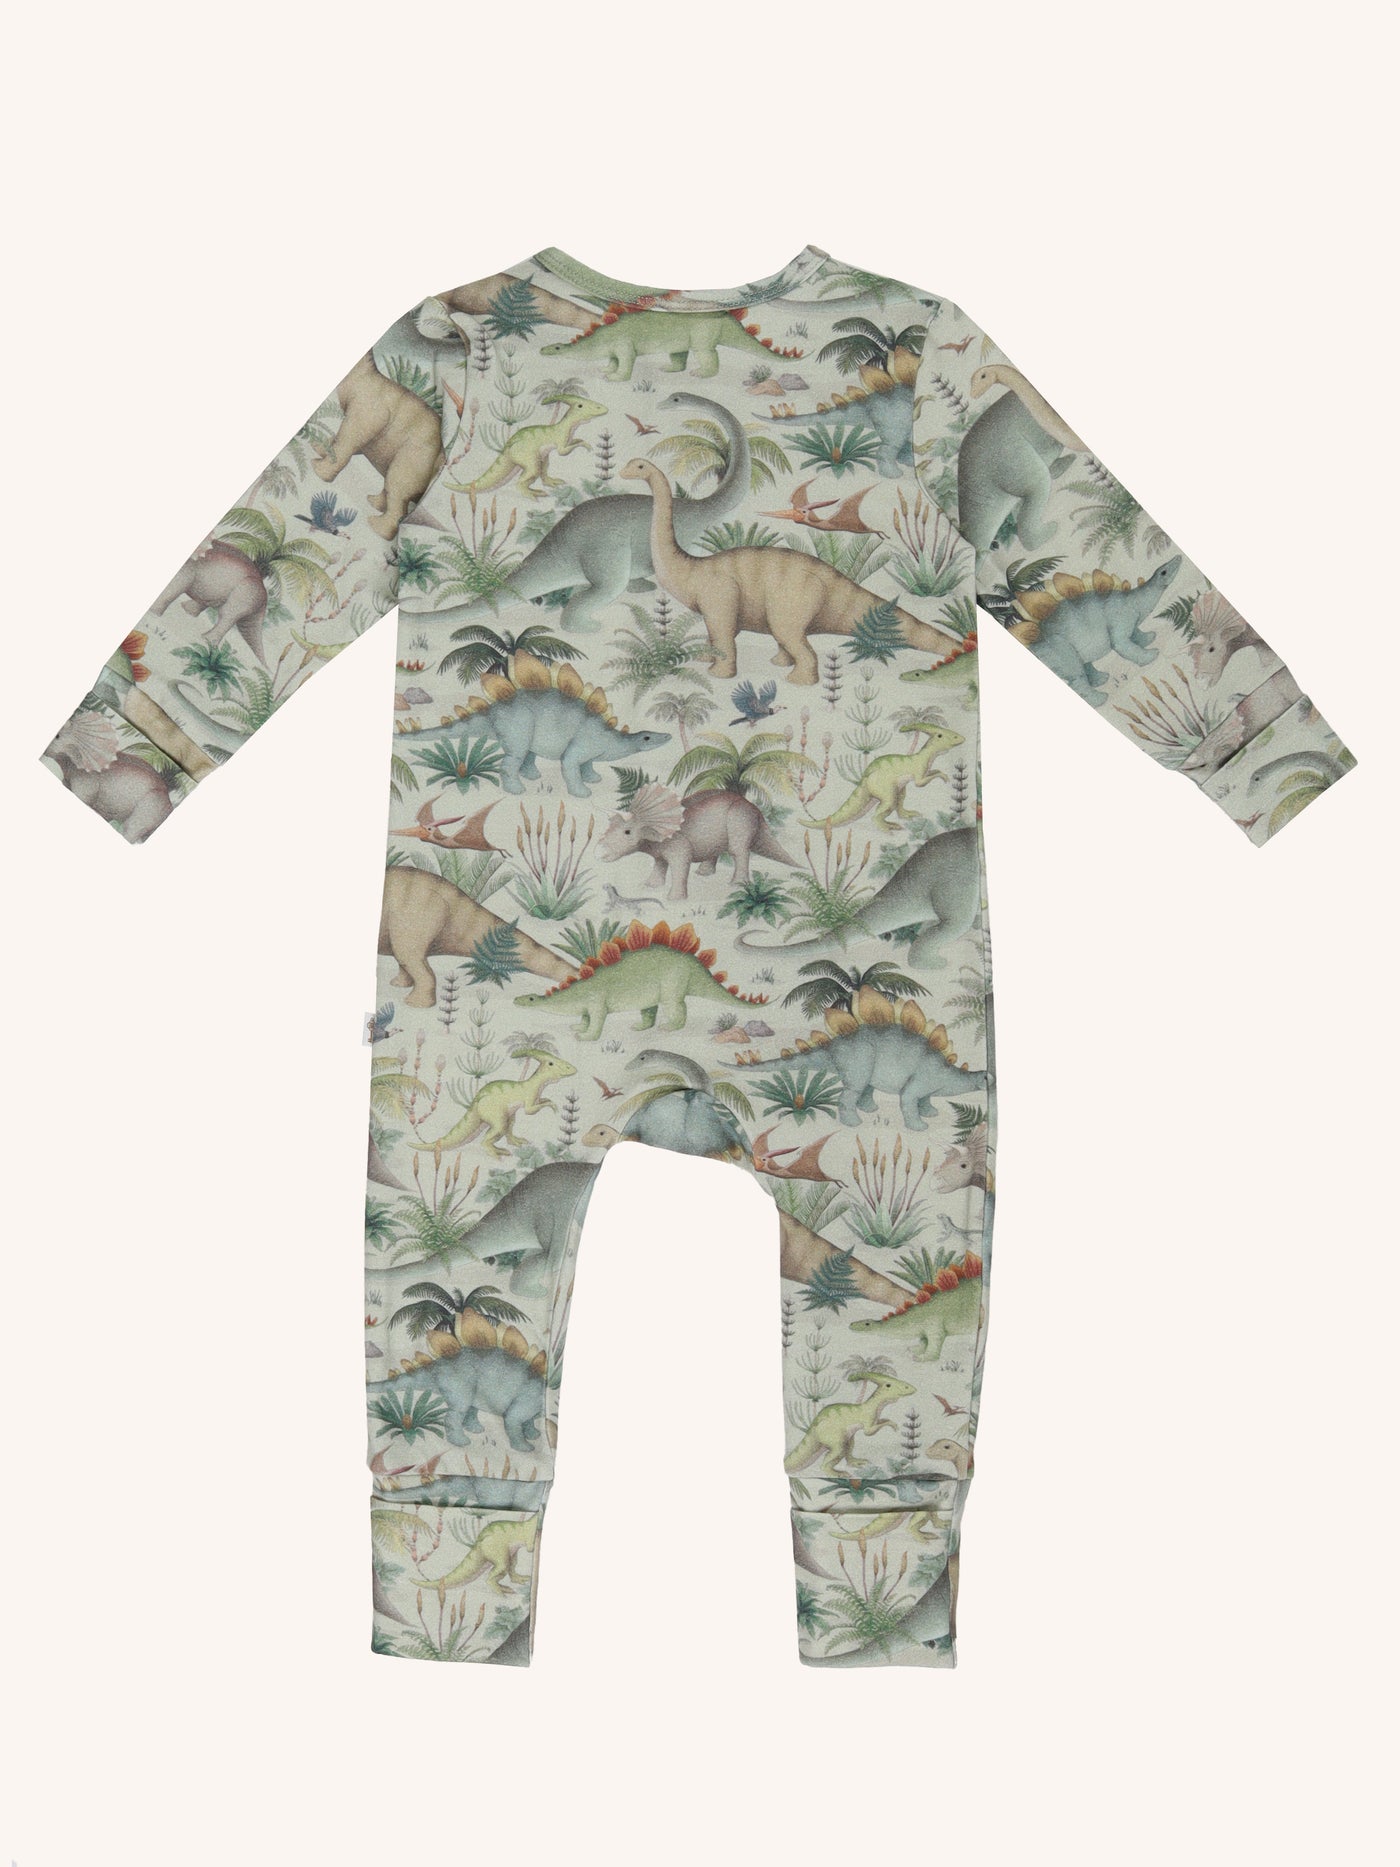 'Prehistorica' Timeless Coverall Onesie - Pale Sage